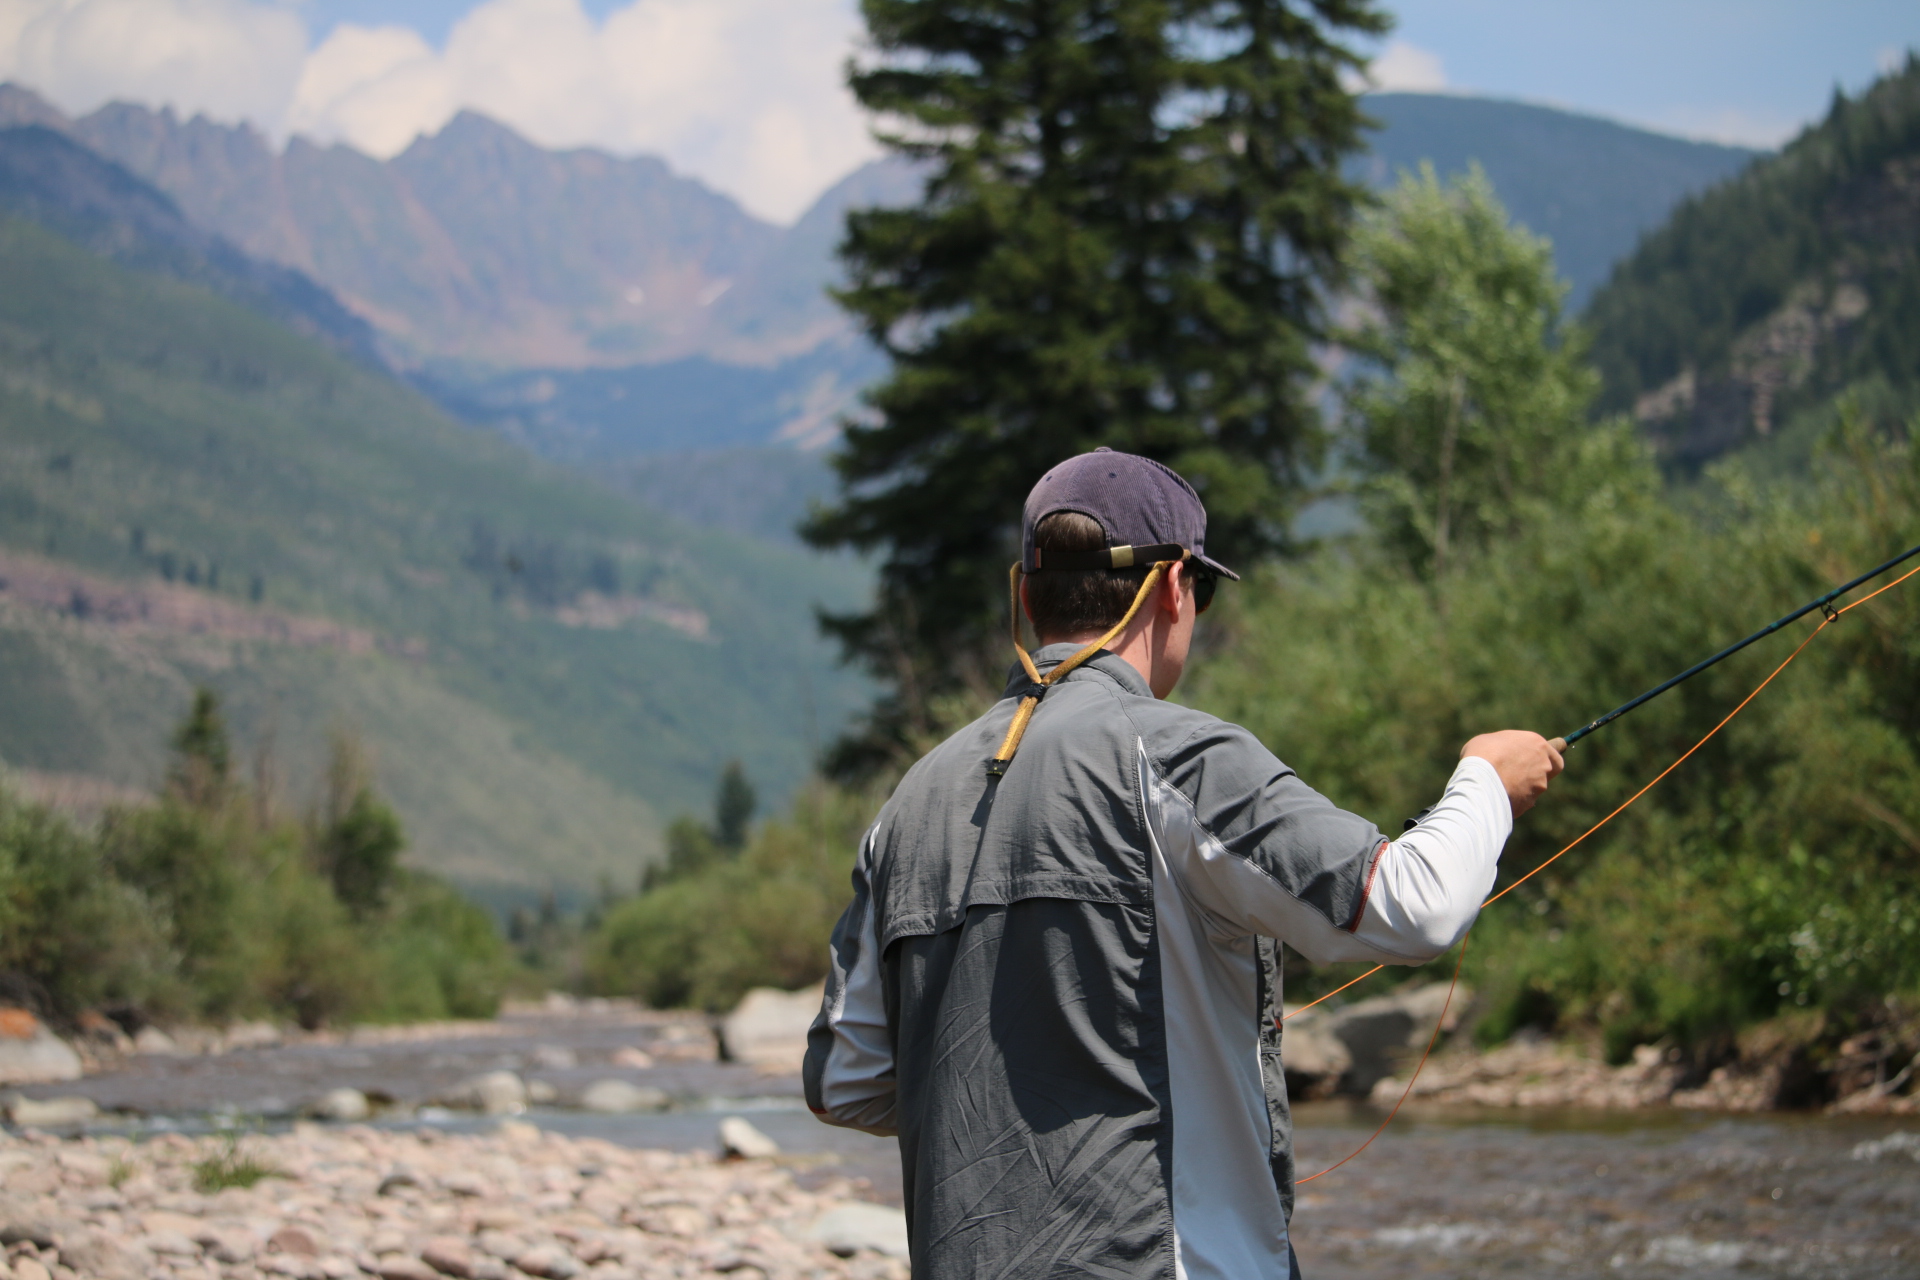 Person casting on Gore Creek with mountains in the background.